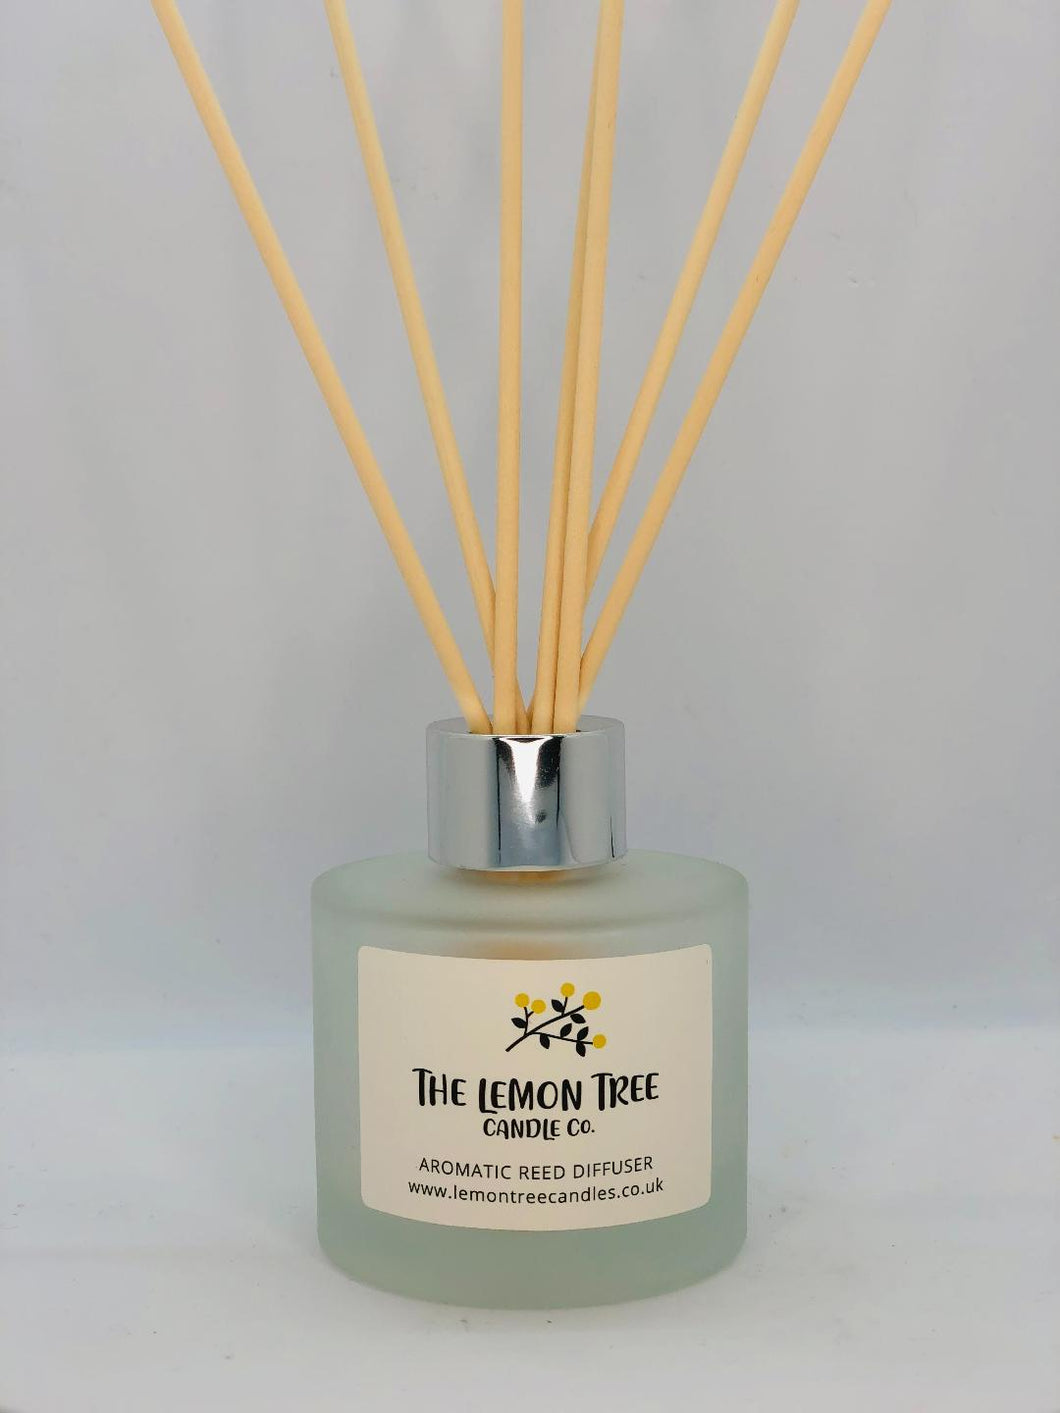 Calon Lân Frosted Glass  Reed Diffuser - Leather & Oak - The Lemon Tree Candle Company